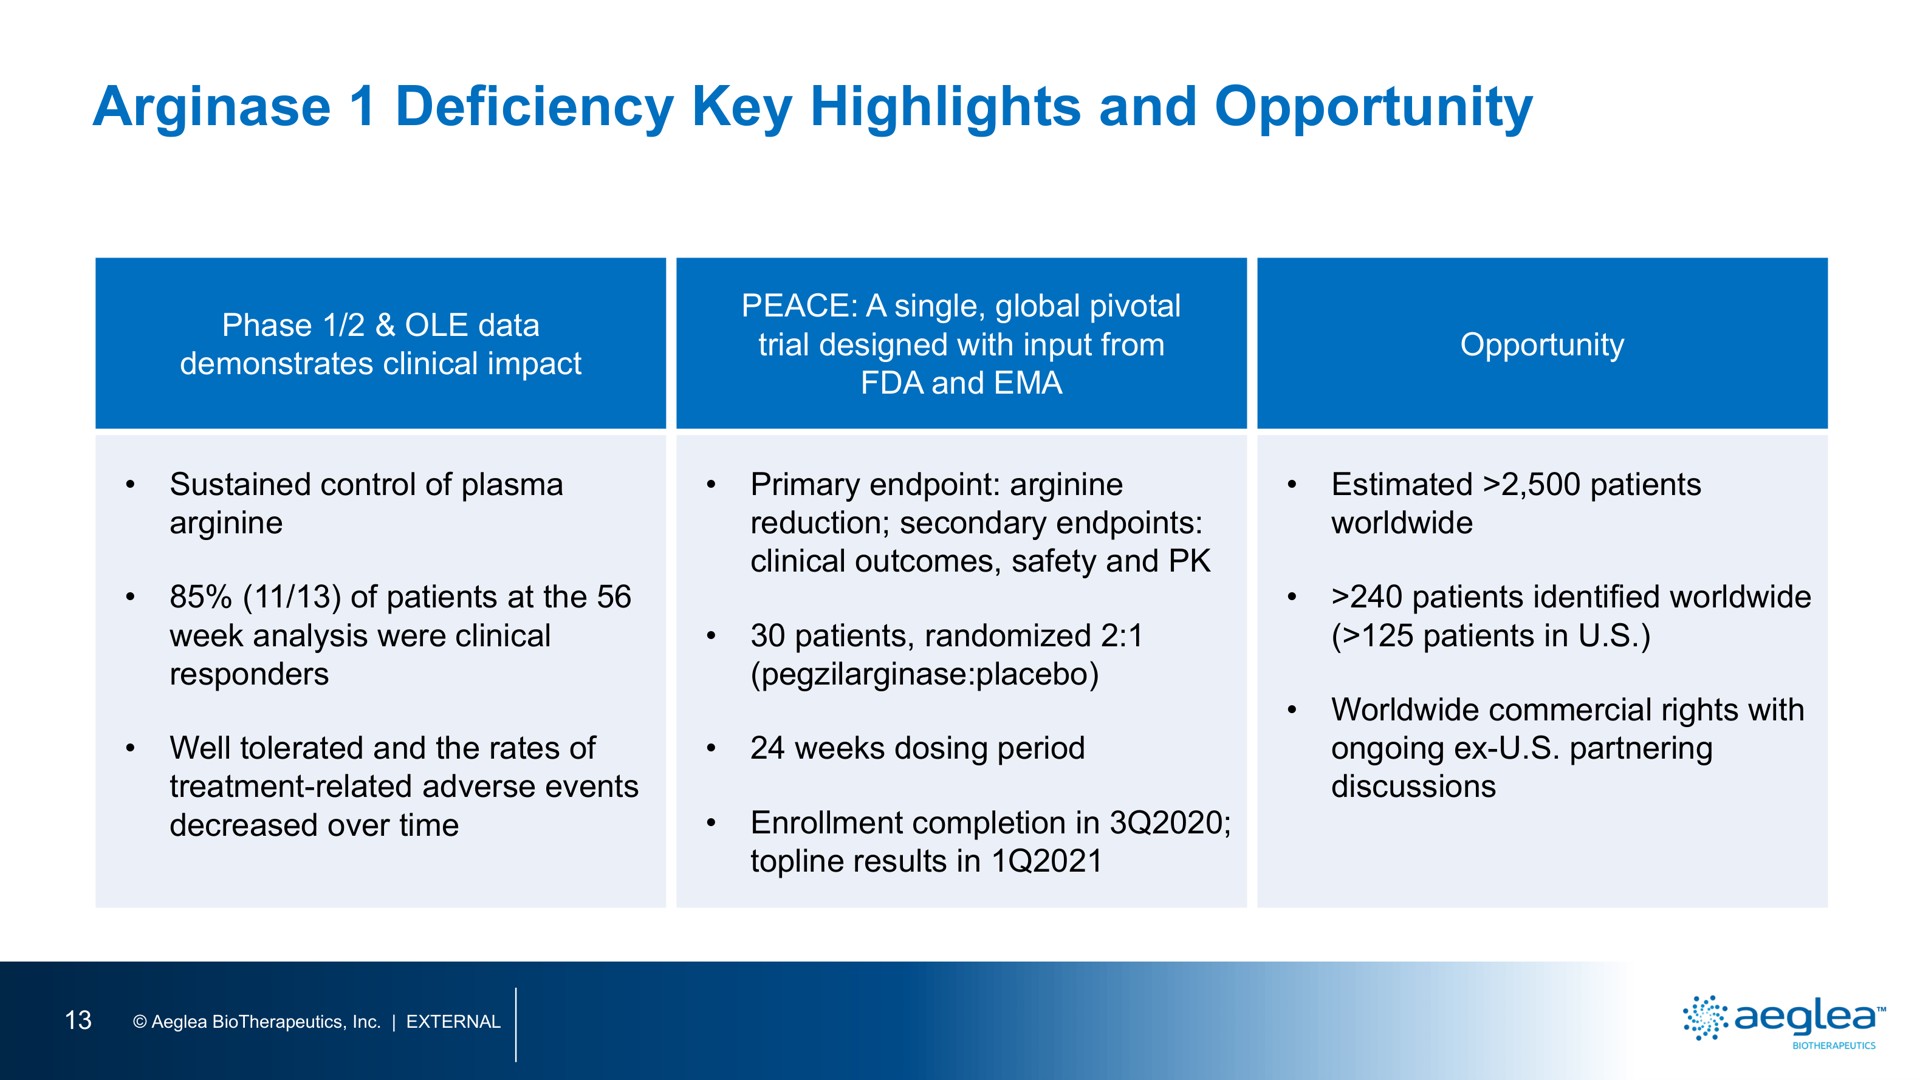 deficiency key highlights and opportunity | Aeglea BioTherapeutics